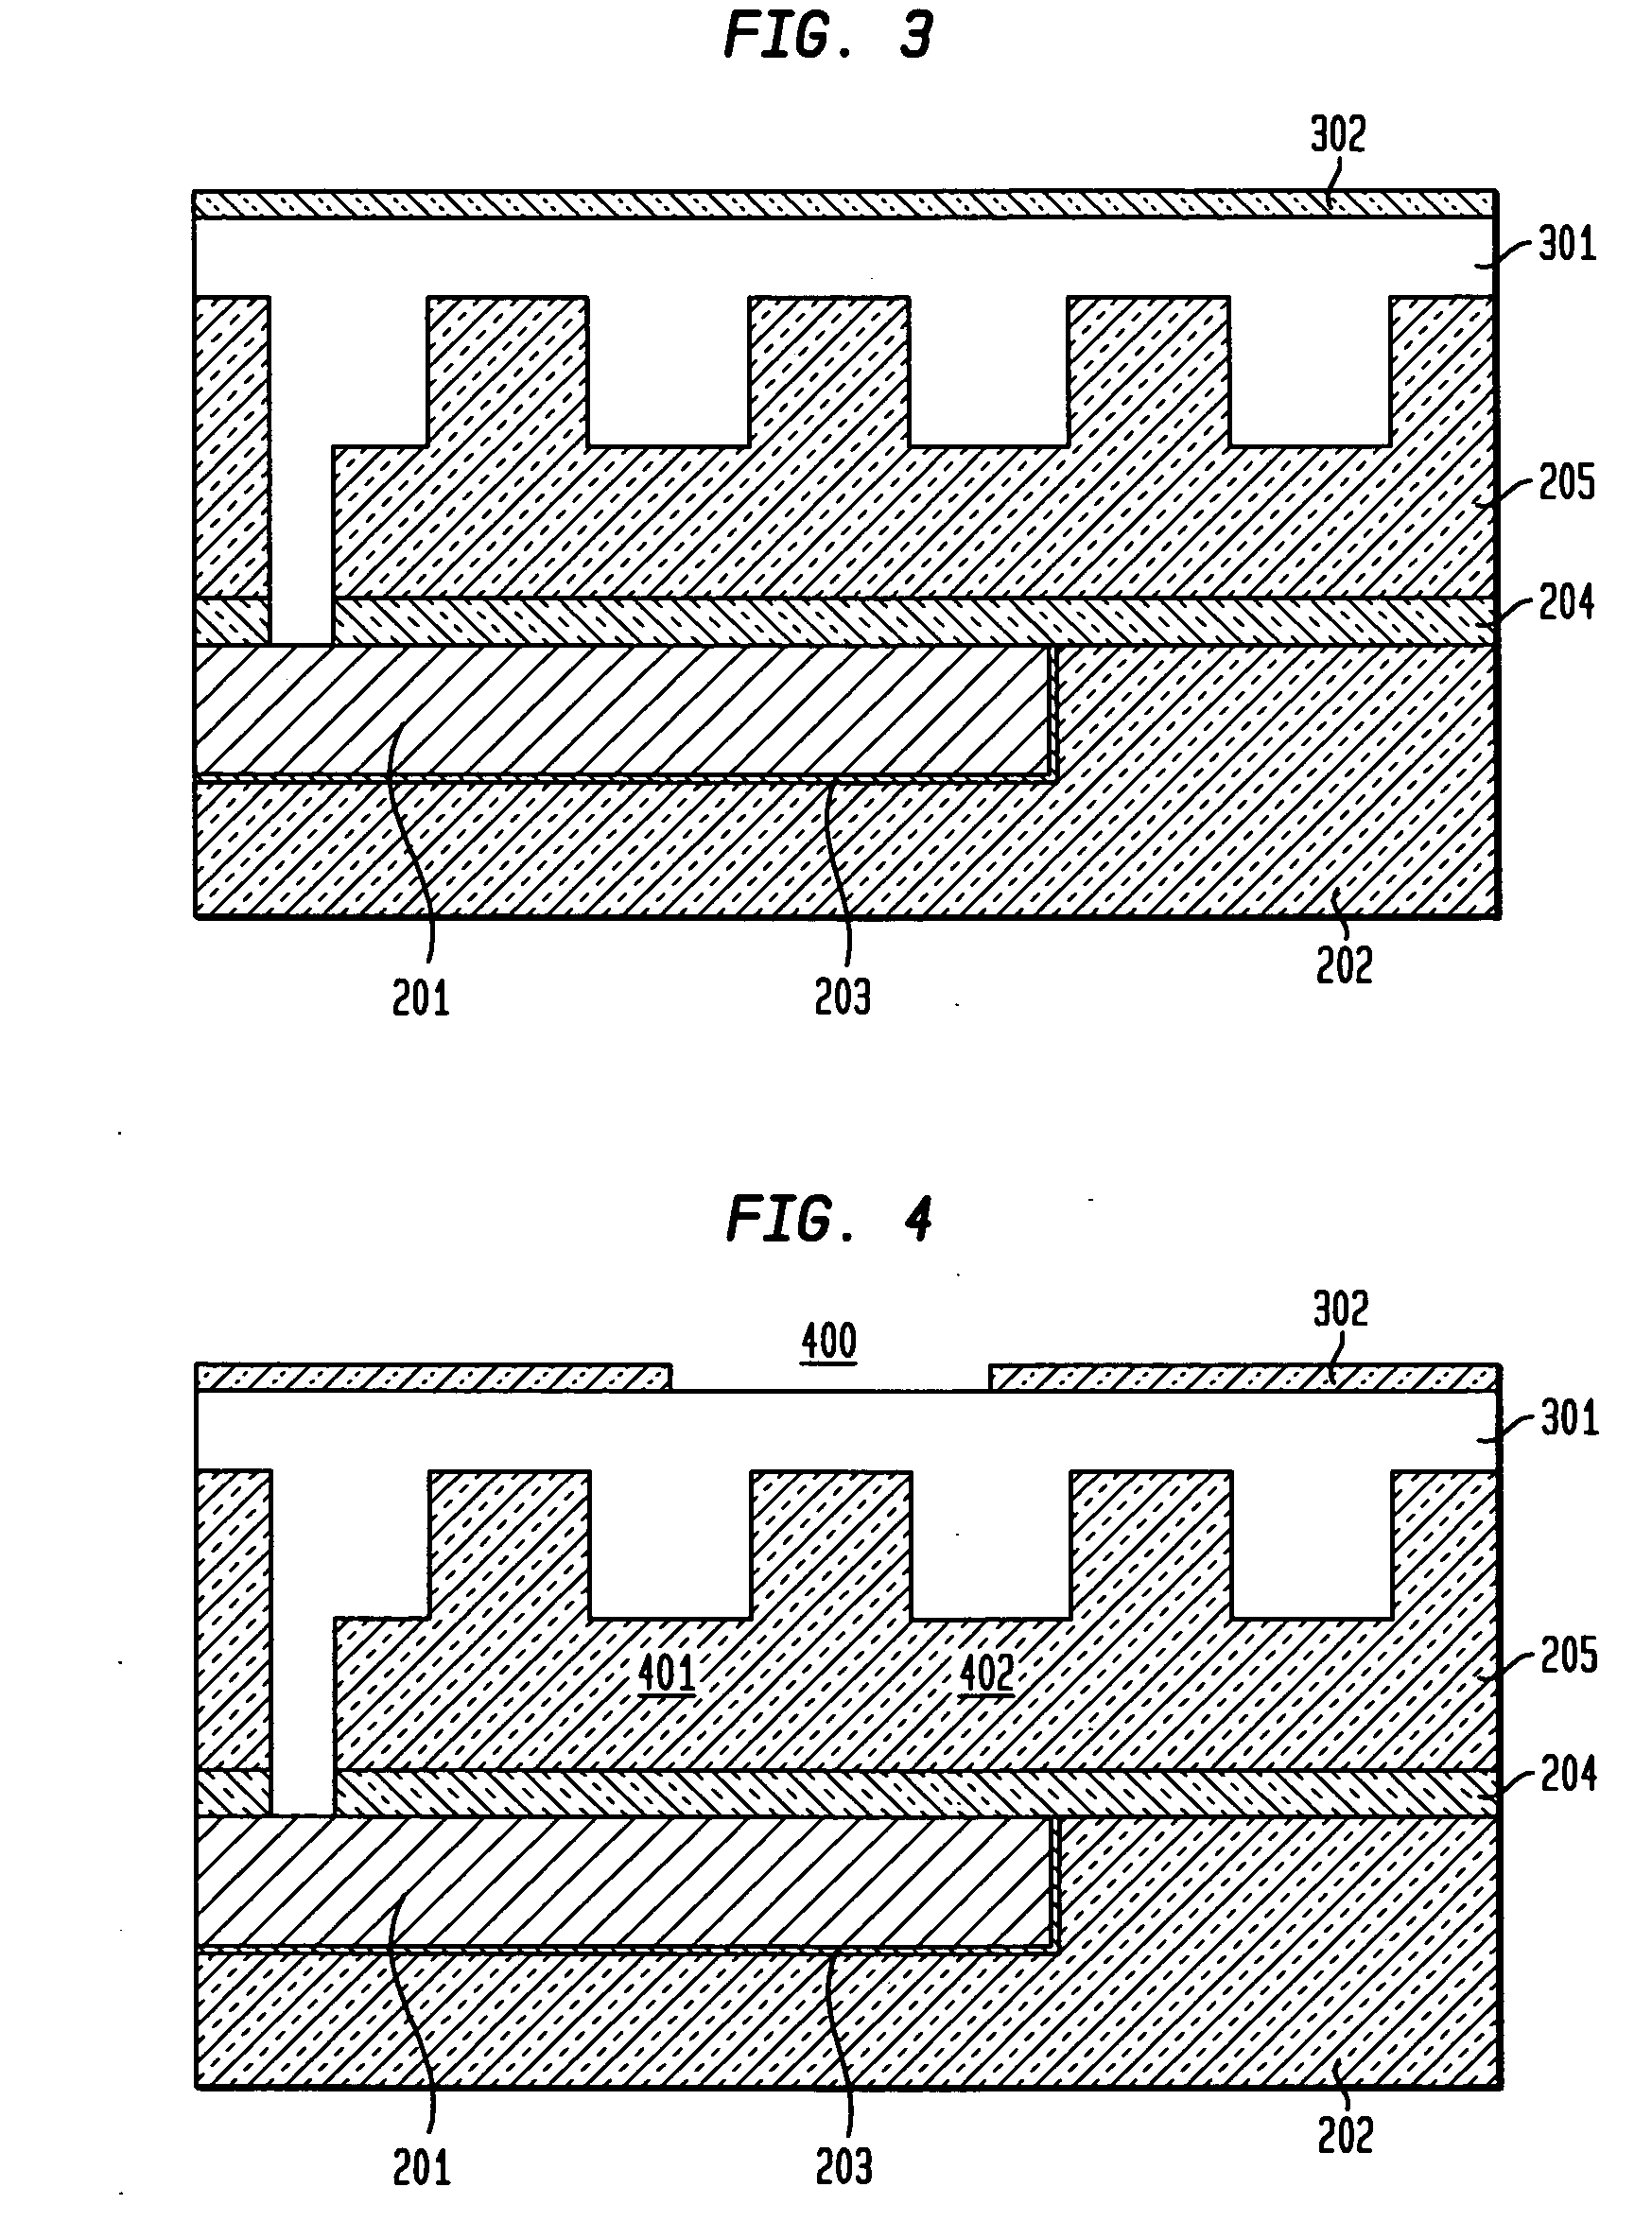 Adopting feature of buried electrically conductive layer in dielectrics for electrical anti-fuse application